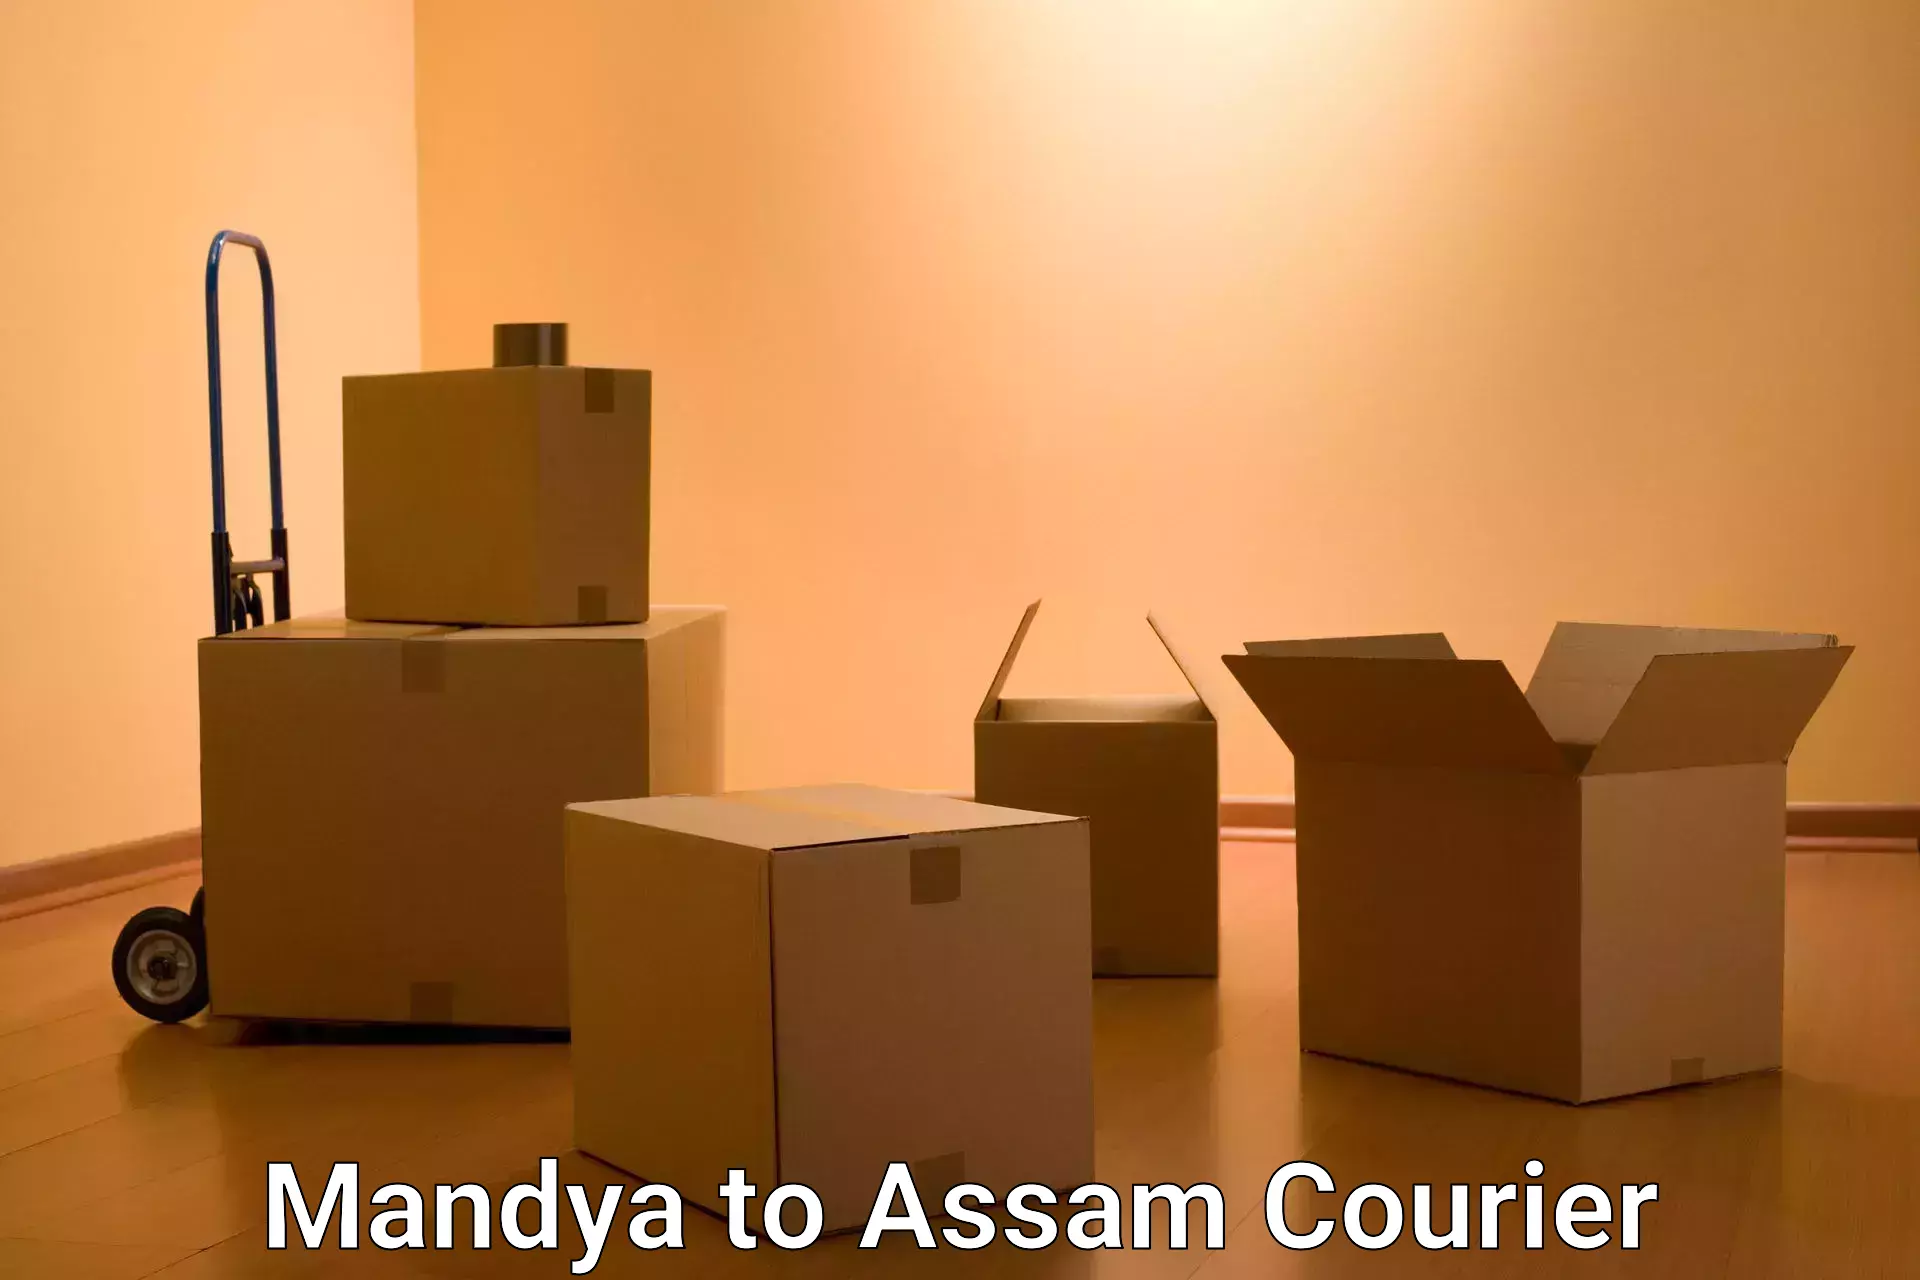 Express delivery network Mandya to Assam